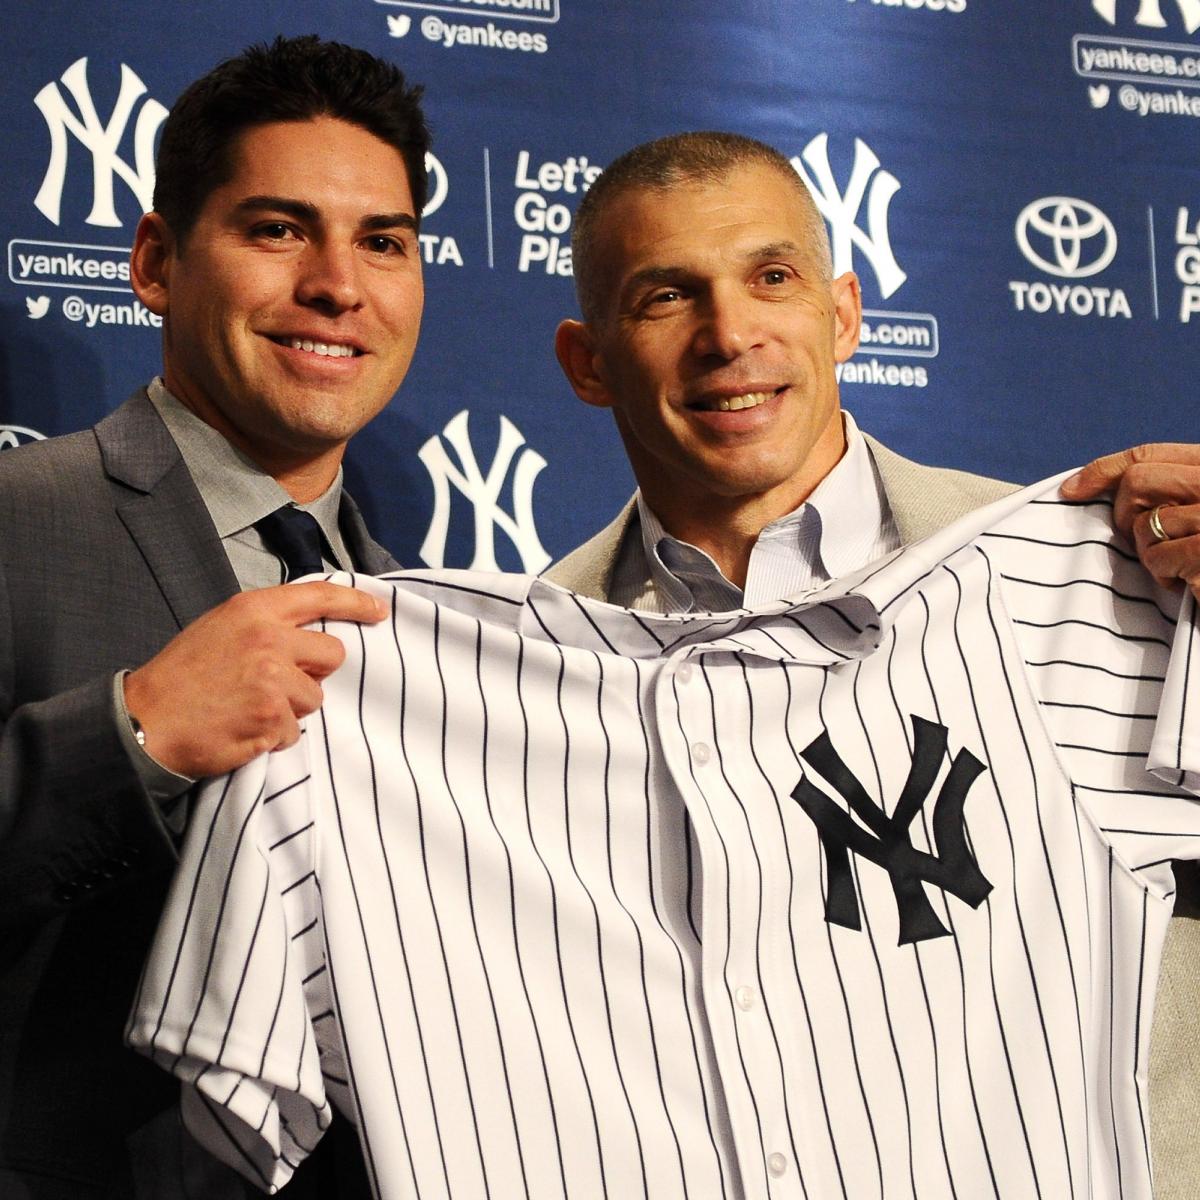 How High Will the New York Yankees' Payroll Rise This Winter? News